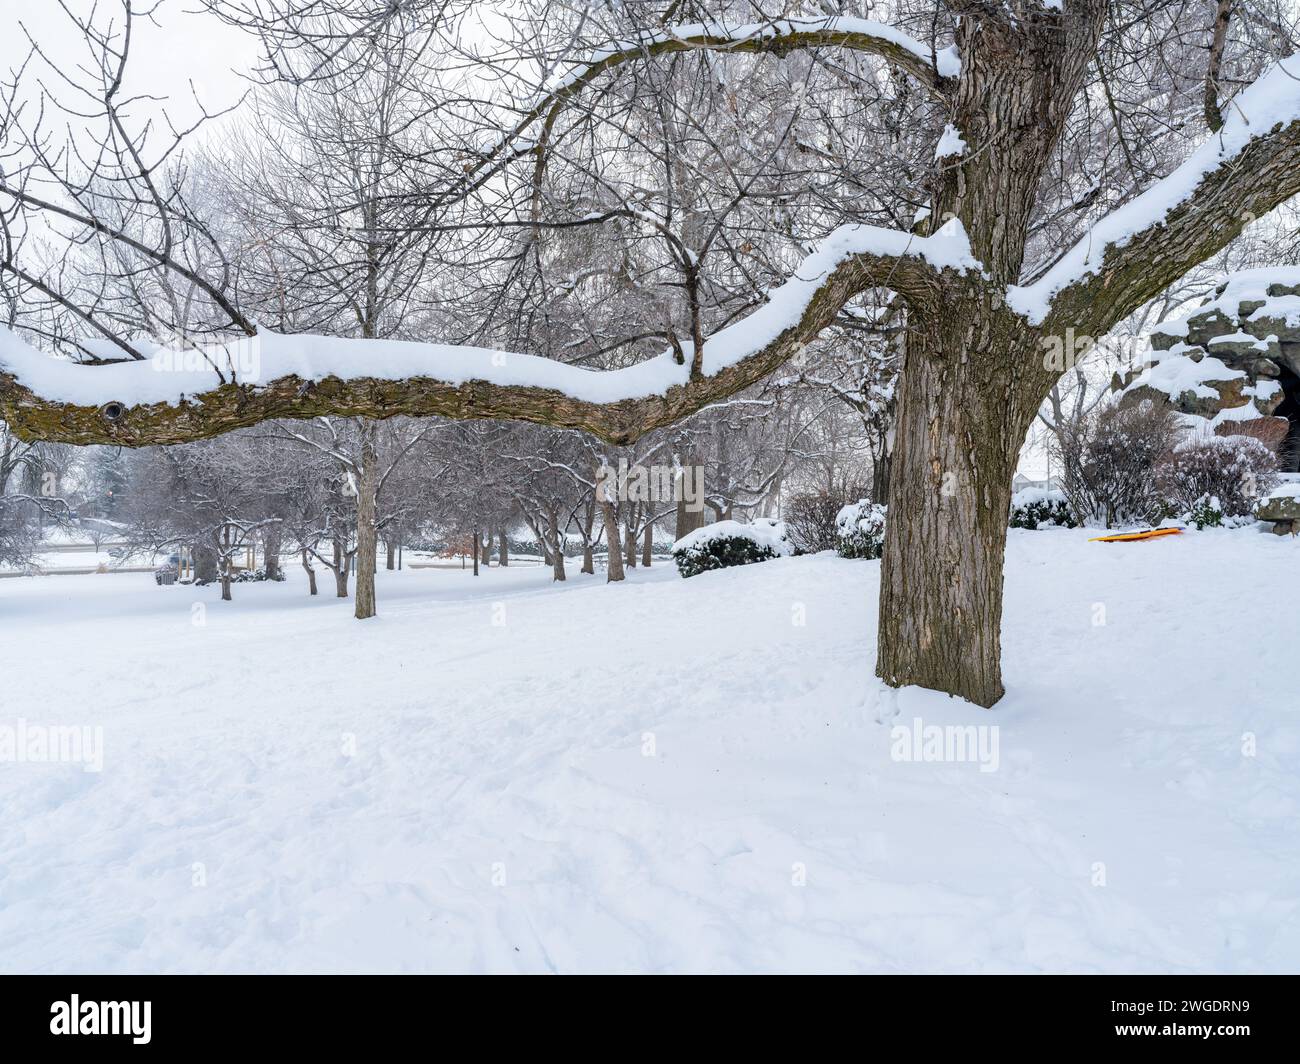 Snow on the ground and an old tree at a public park Stock Photo